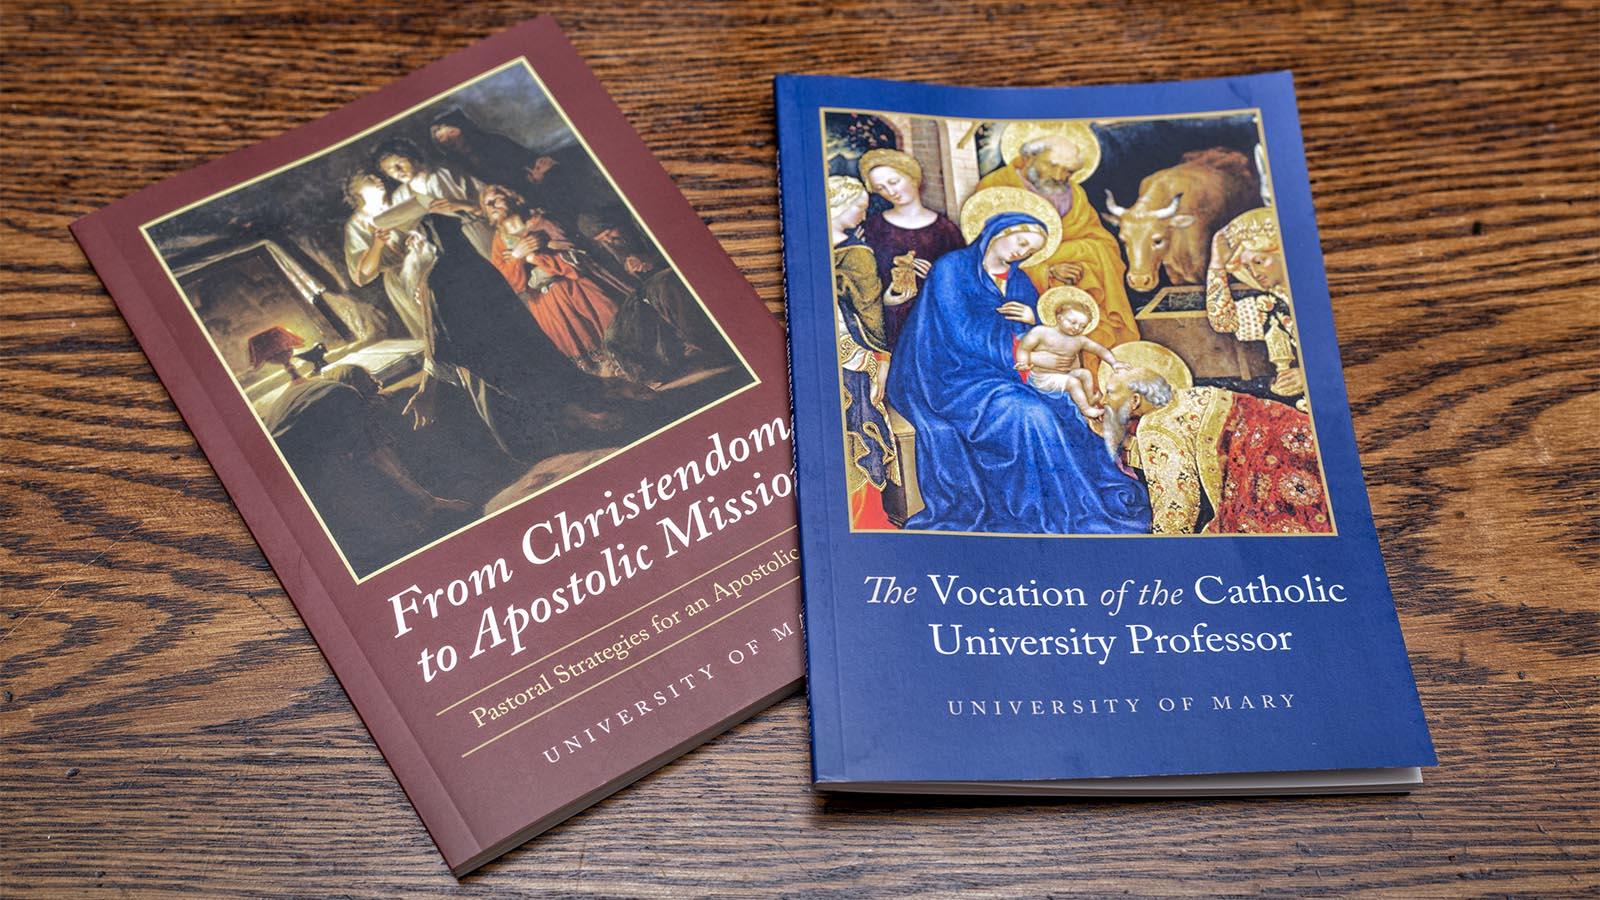 “From Christendom to Apostolic Mission” and “The Vocation of the Catholic University Professor” laying on a wooden table.